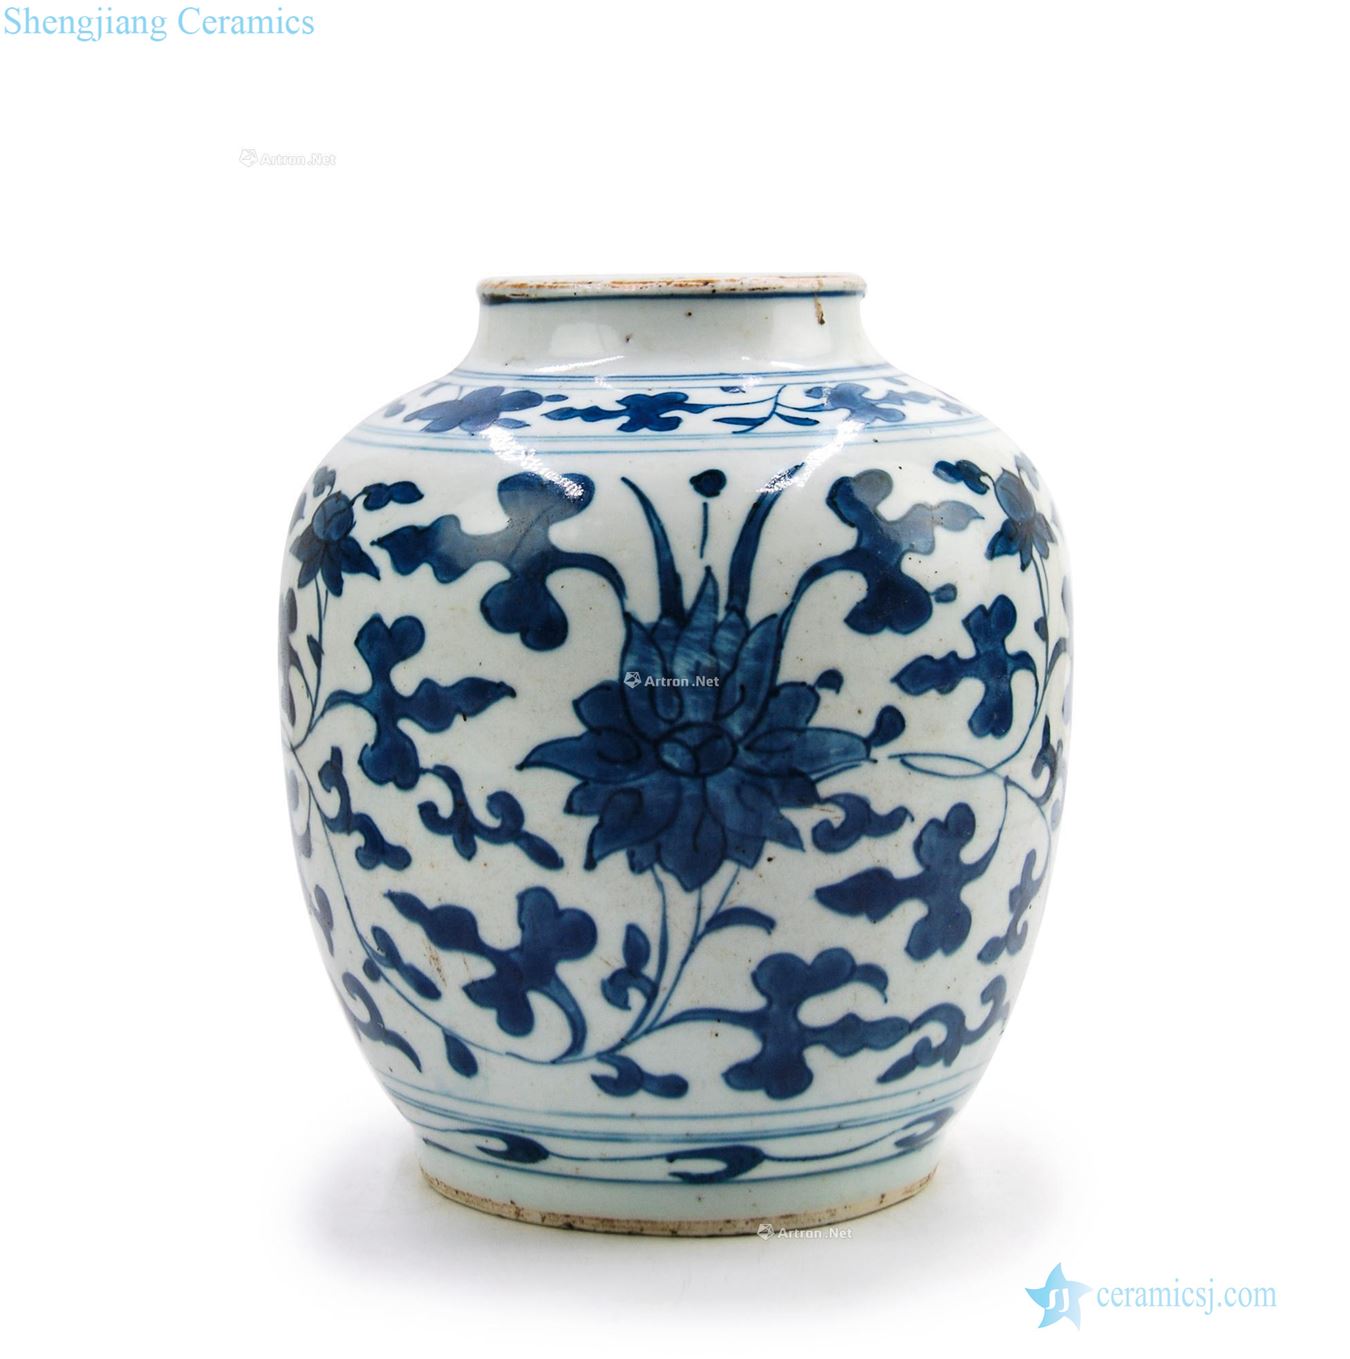 In the Ming dynasty Blue treasure phase pattern cans